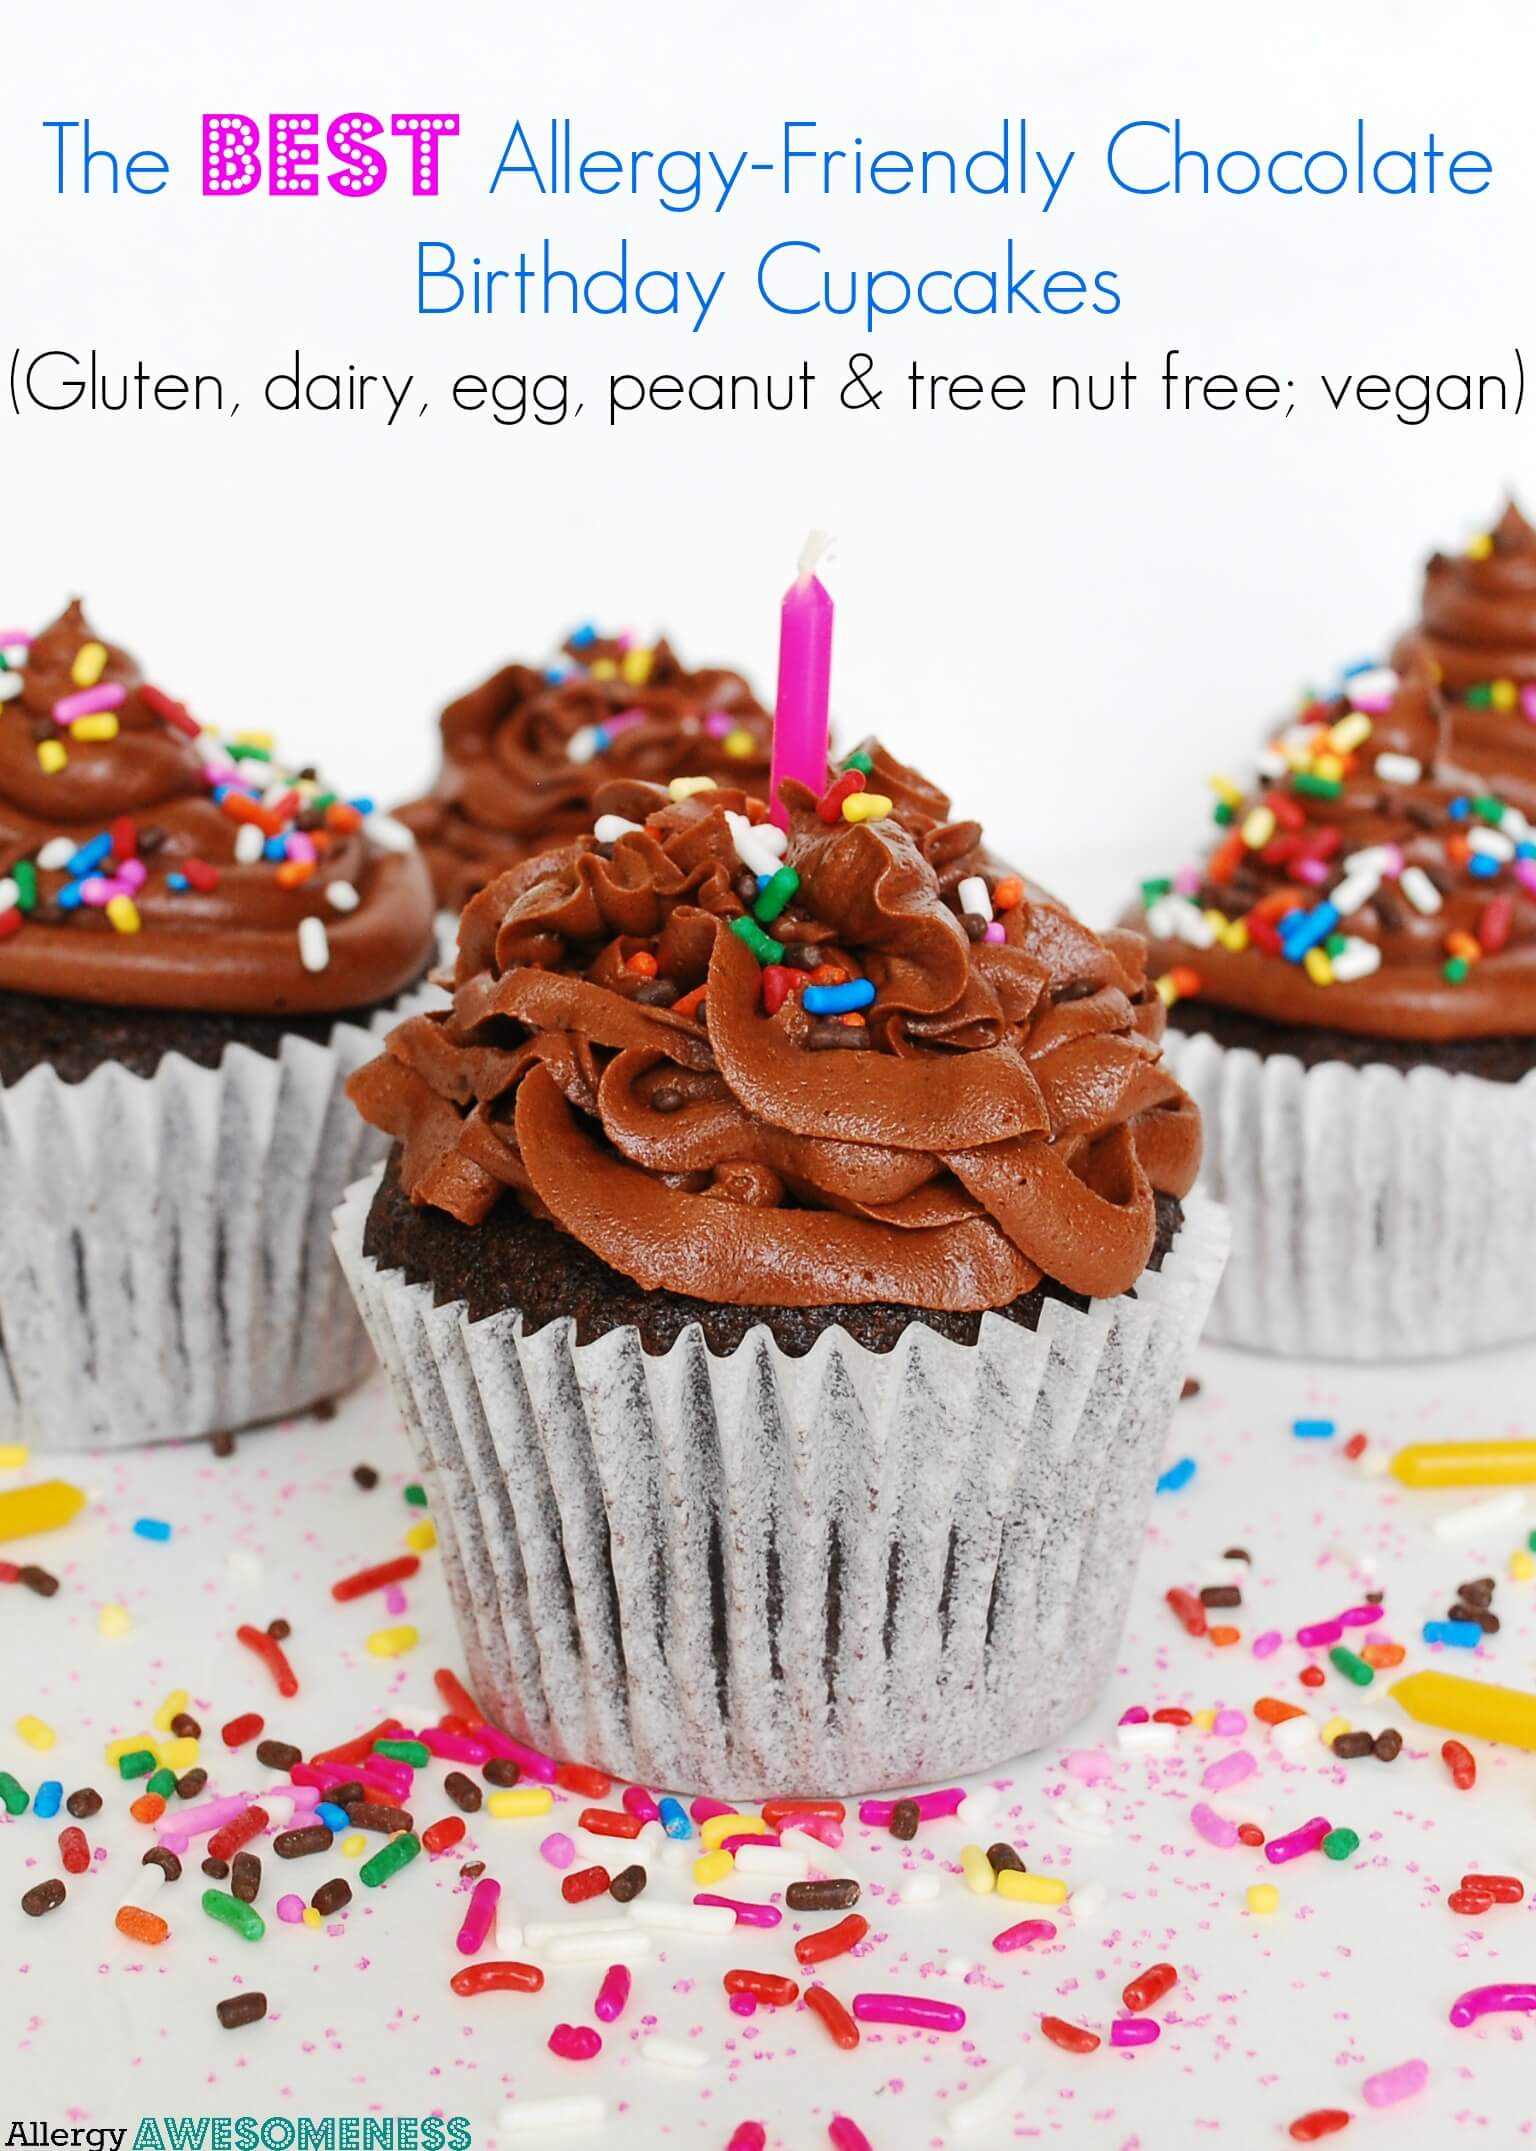 The BEST Allergy-friendly Chocolate Birthday Cupcakes